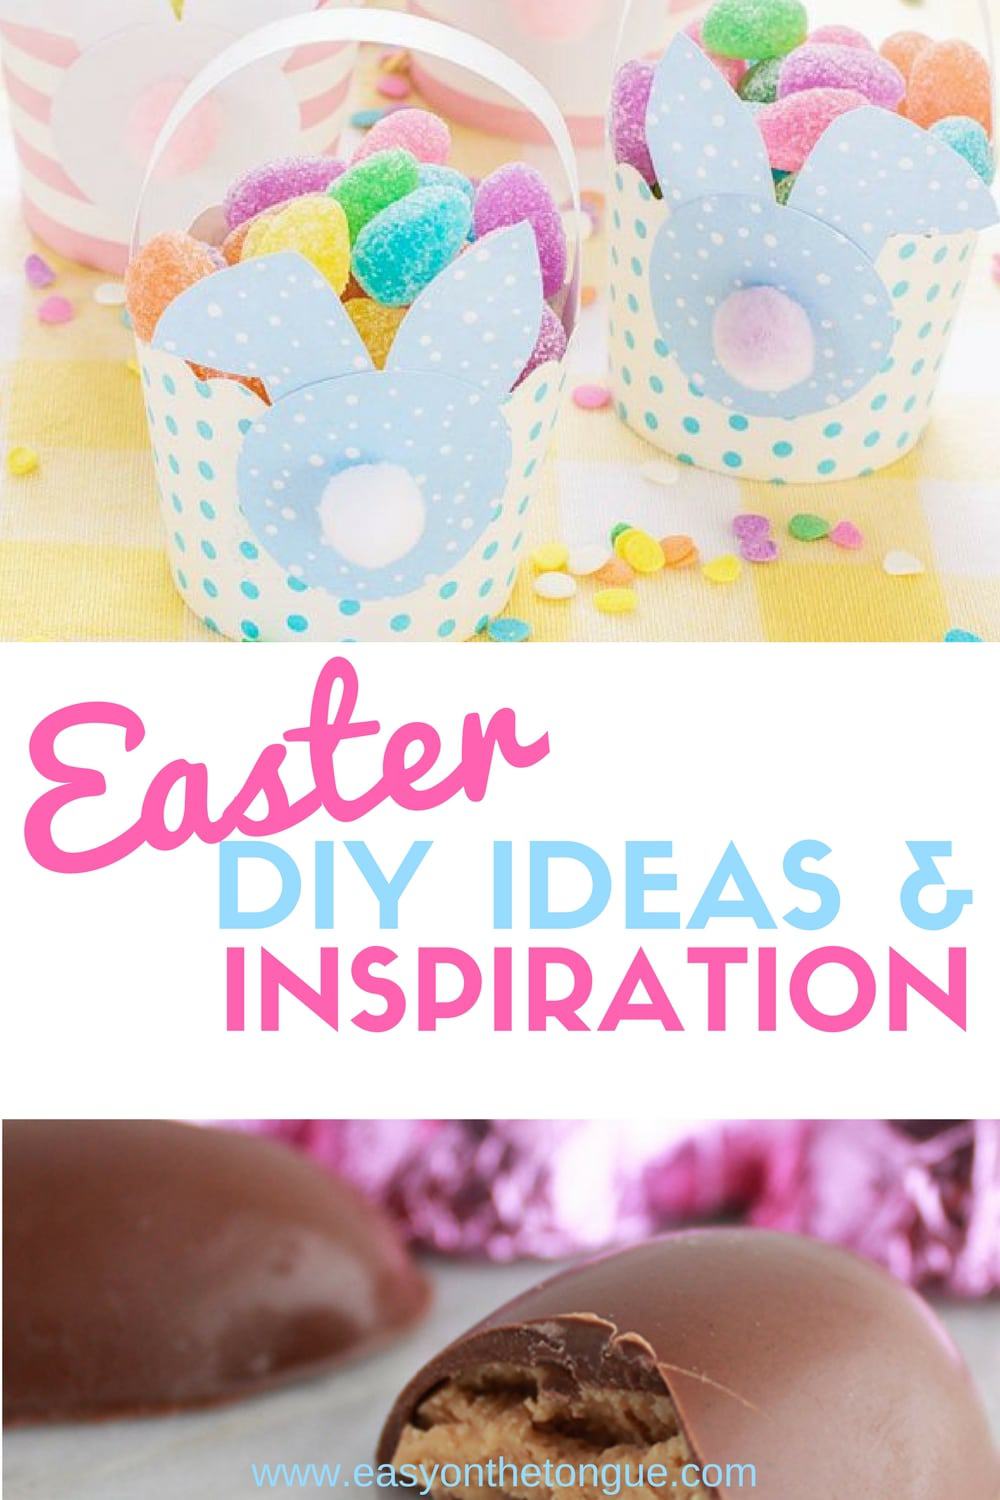 Easter DIY Ideas Inspiration The 10 Best adorable Easter DIY gift inspirations and printables